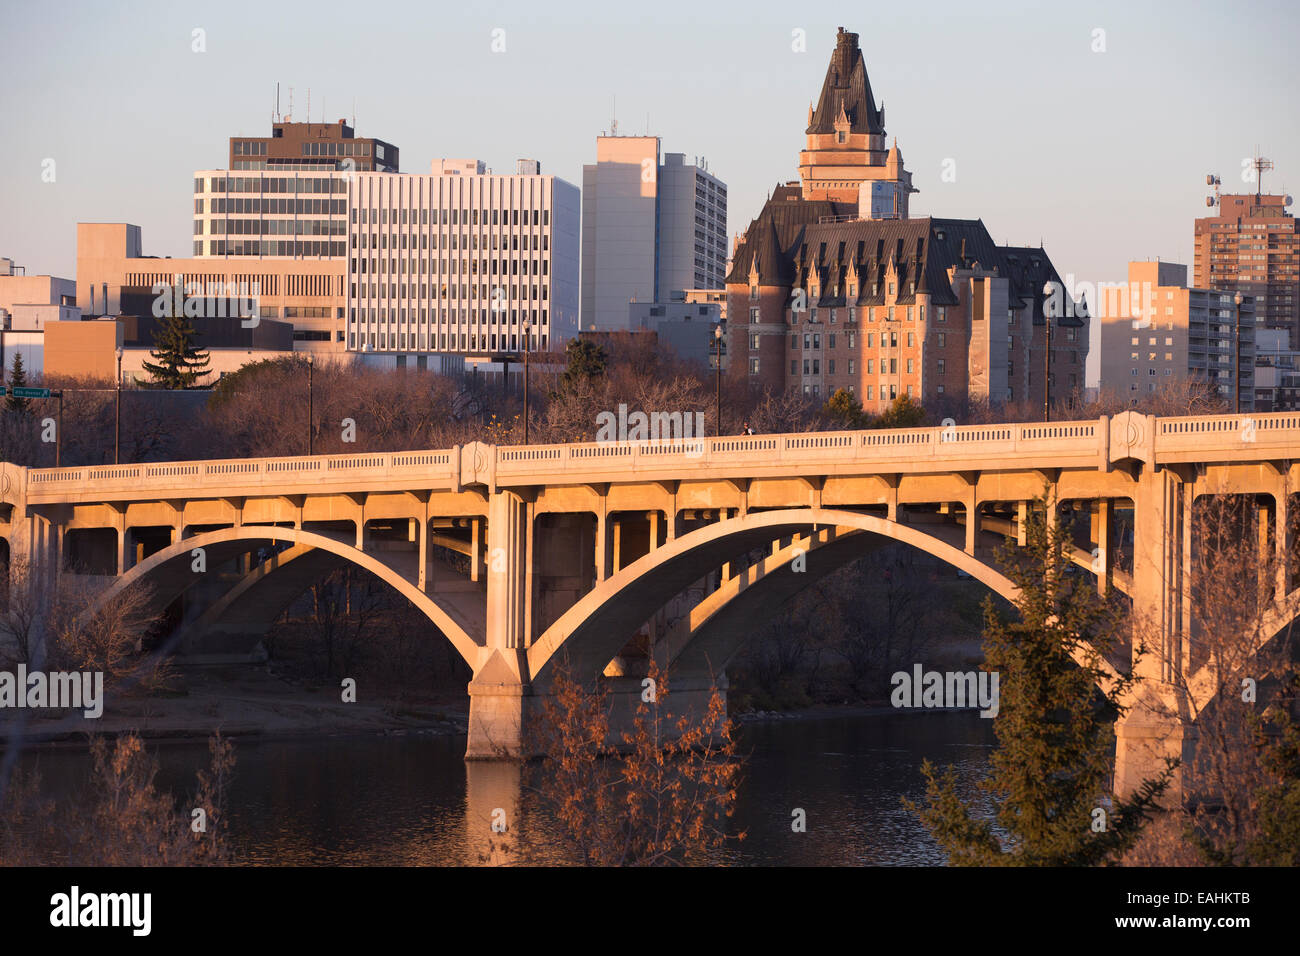 Broadway Bridge with Saskatoon skyline including Bessborough hotel. The bridge was built in 1932 as a make-work project during the great depression. Stock Photo